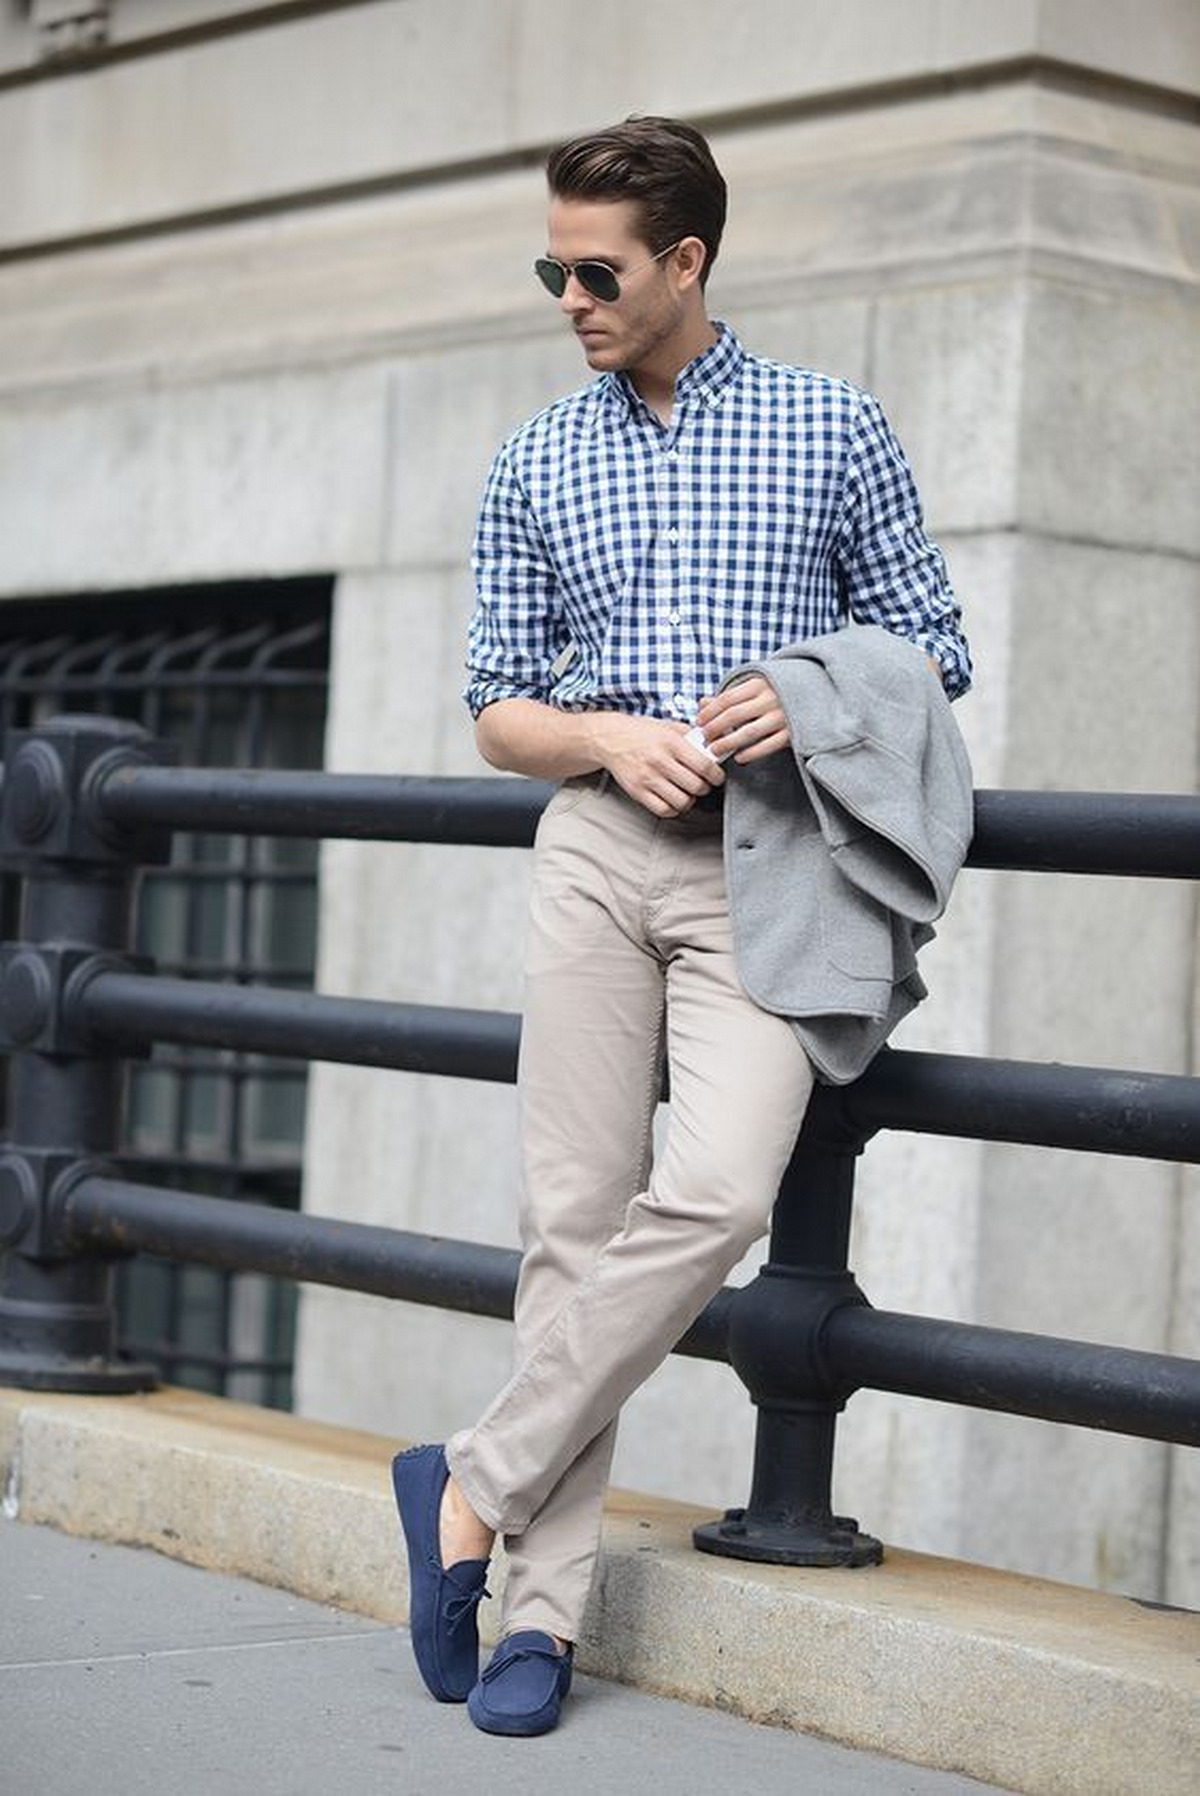 Blue Plaid Shirt, Chinos Pants, And Blue Suede Loafers